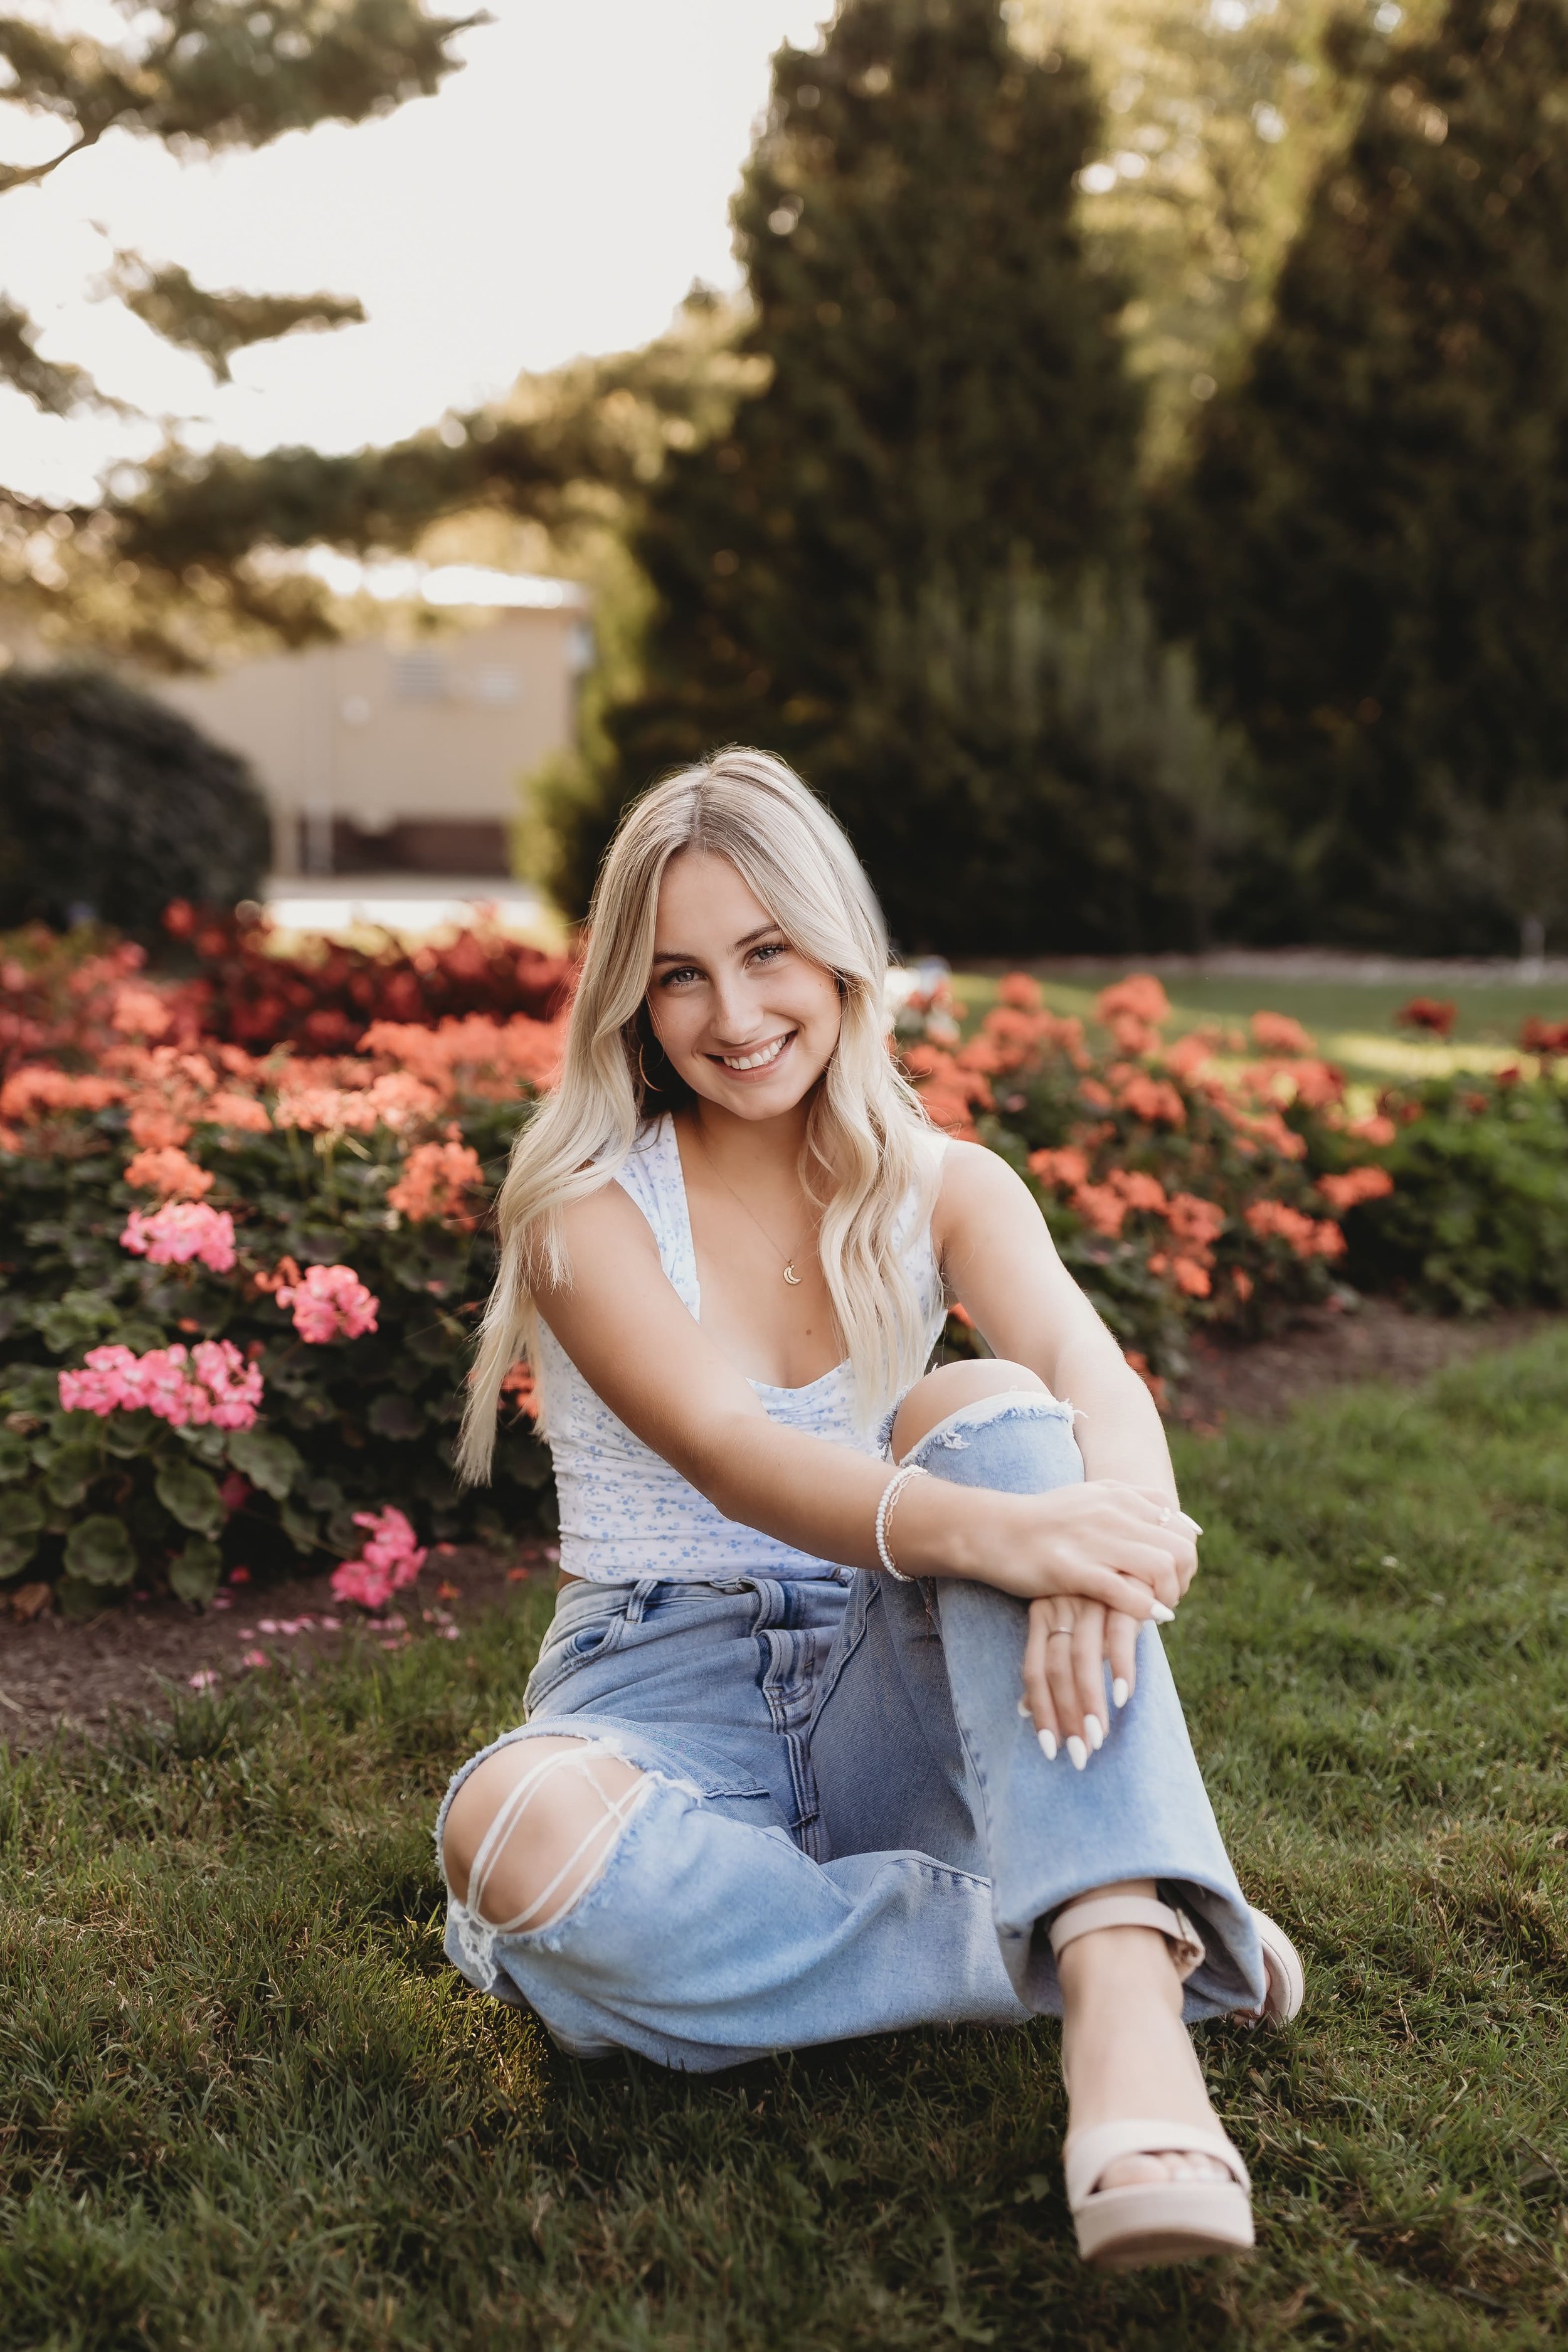  parker sits in the grass and smiles with her arms resting on her leg in front of a flower bed for her senior photos 